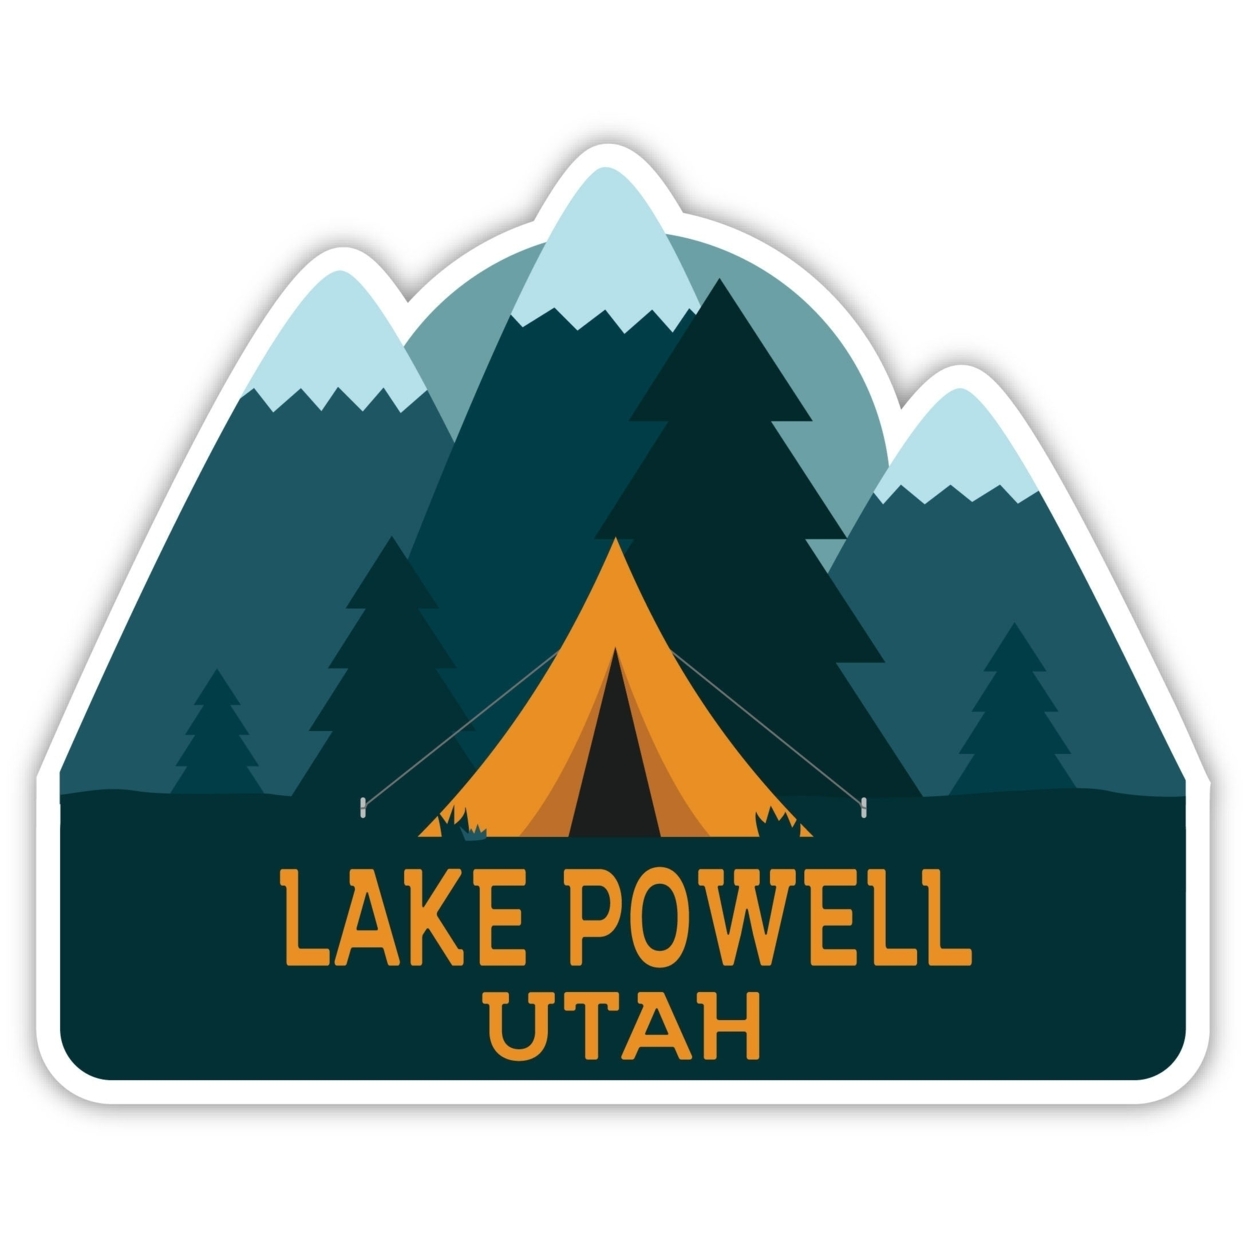 Lake Powell Utah Souvenir Decorative Stickers (Choose Theme And Size) - 4-Inch, Camp Life